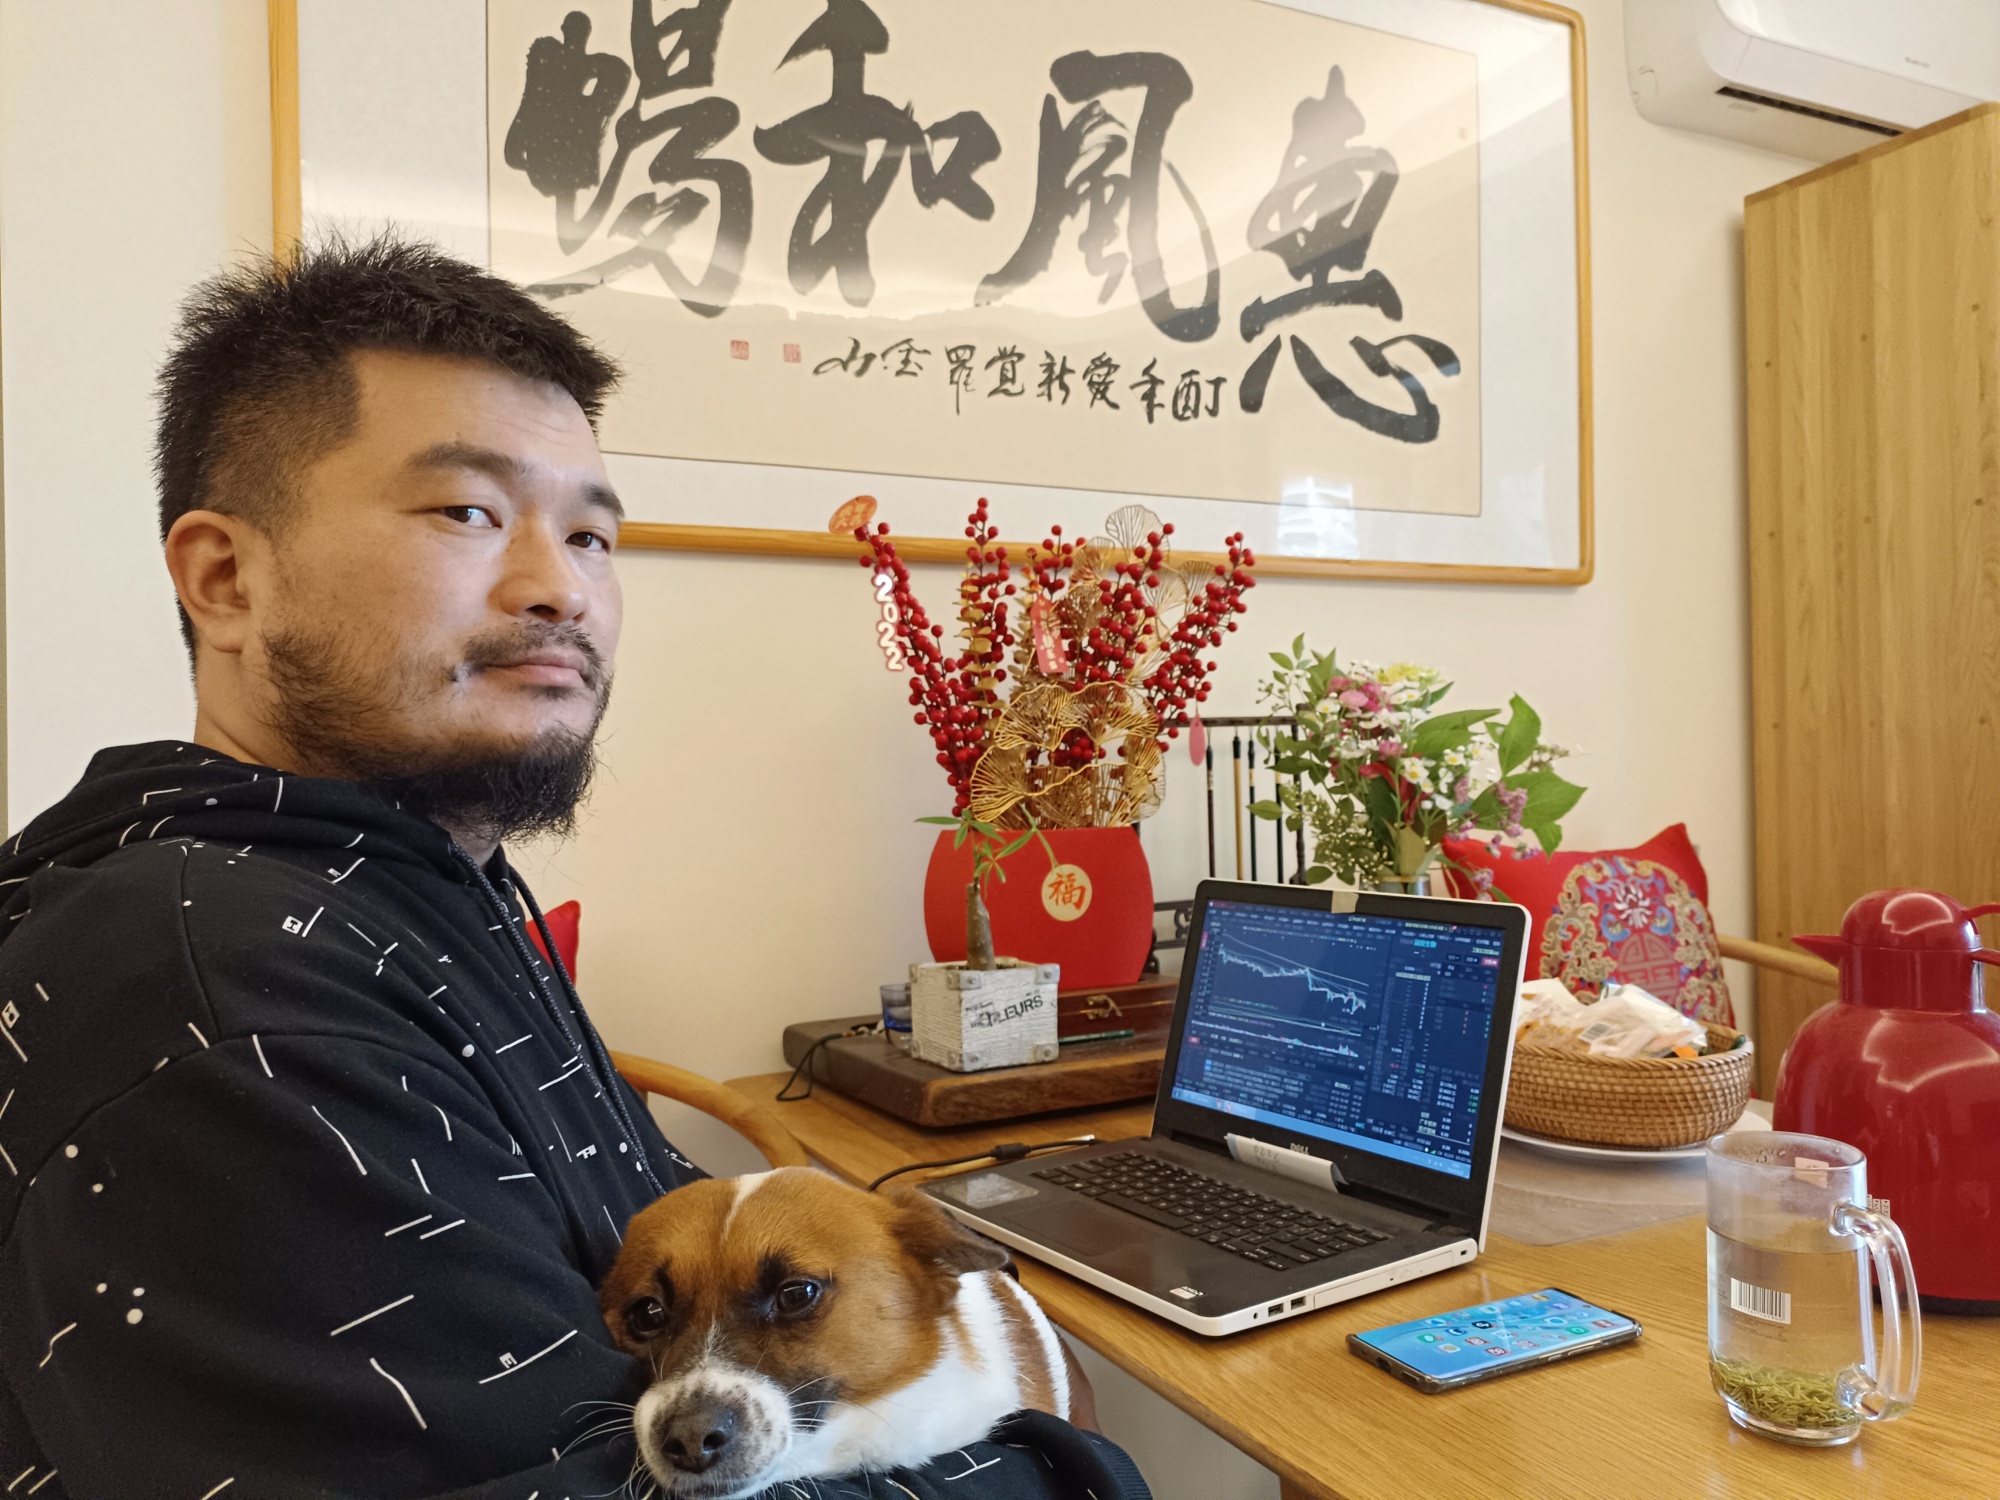 Clawde Yin, here&nbsp;with his dog at his home in Shanghai, is concerned about what&nbsp;snap government policy changes would do to his savings in real estate or stocks.